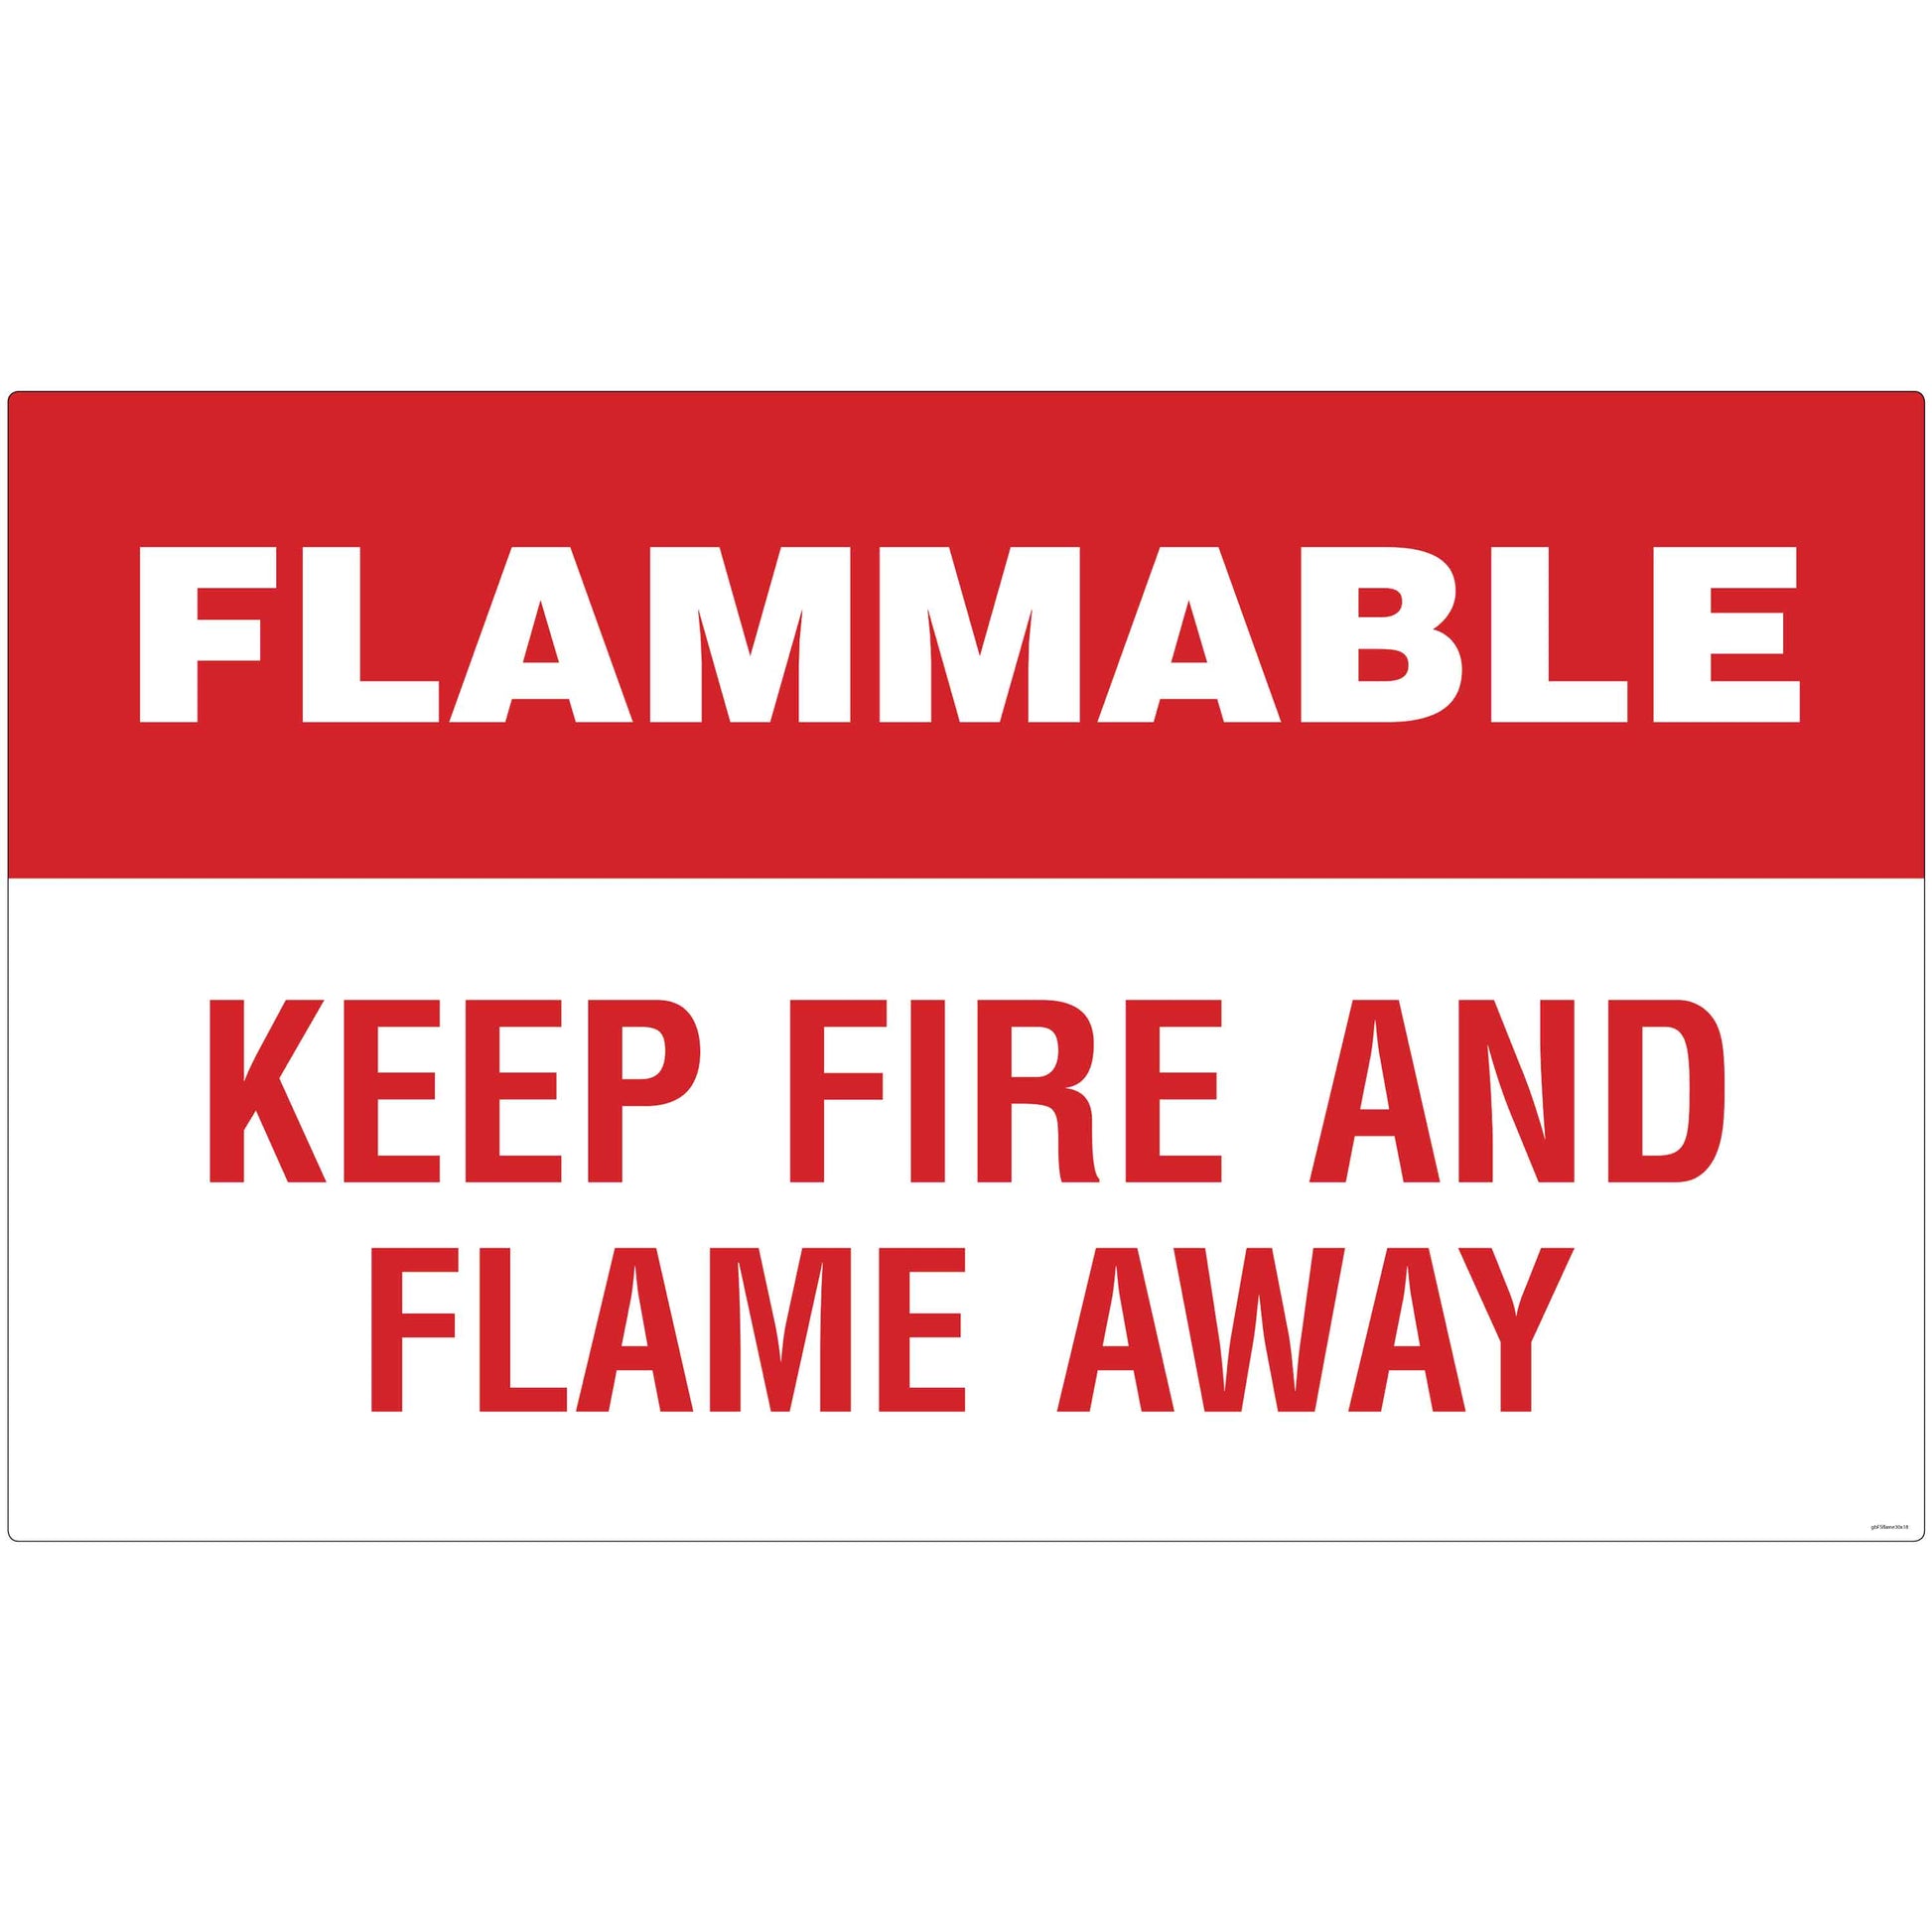 Flammable - Keep Fire And Flame Away Decal. 30 inches by 18 inches in size. 